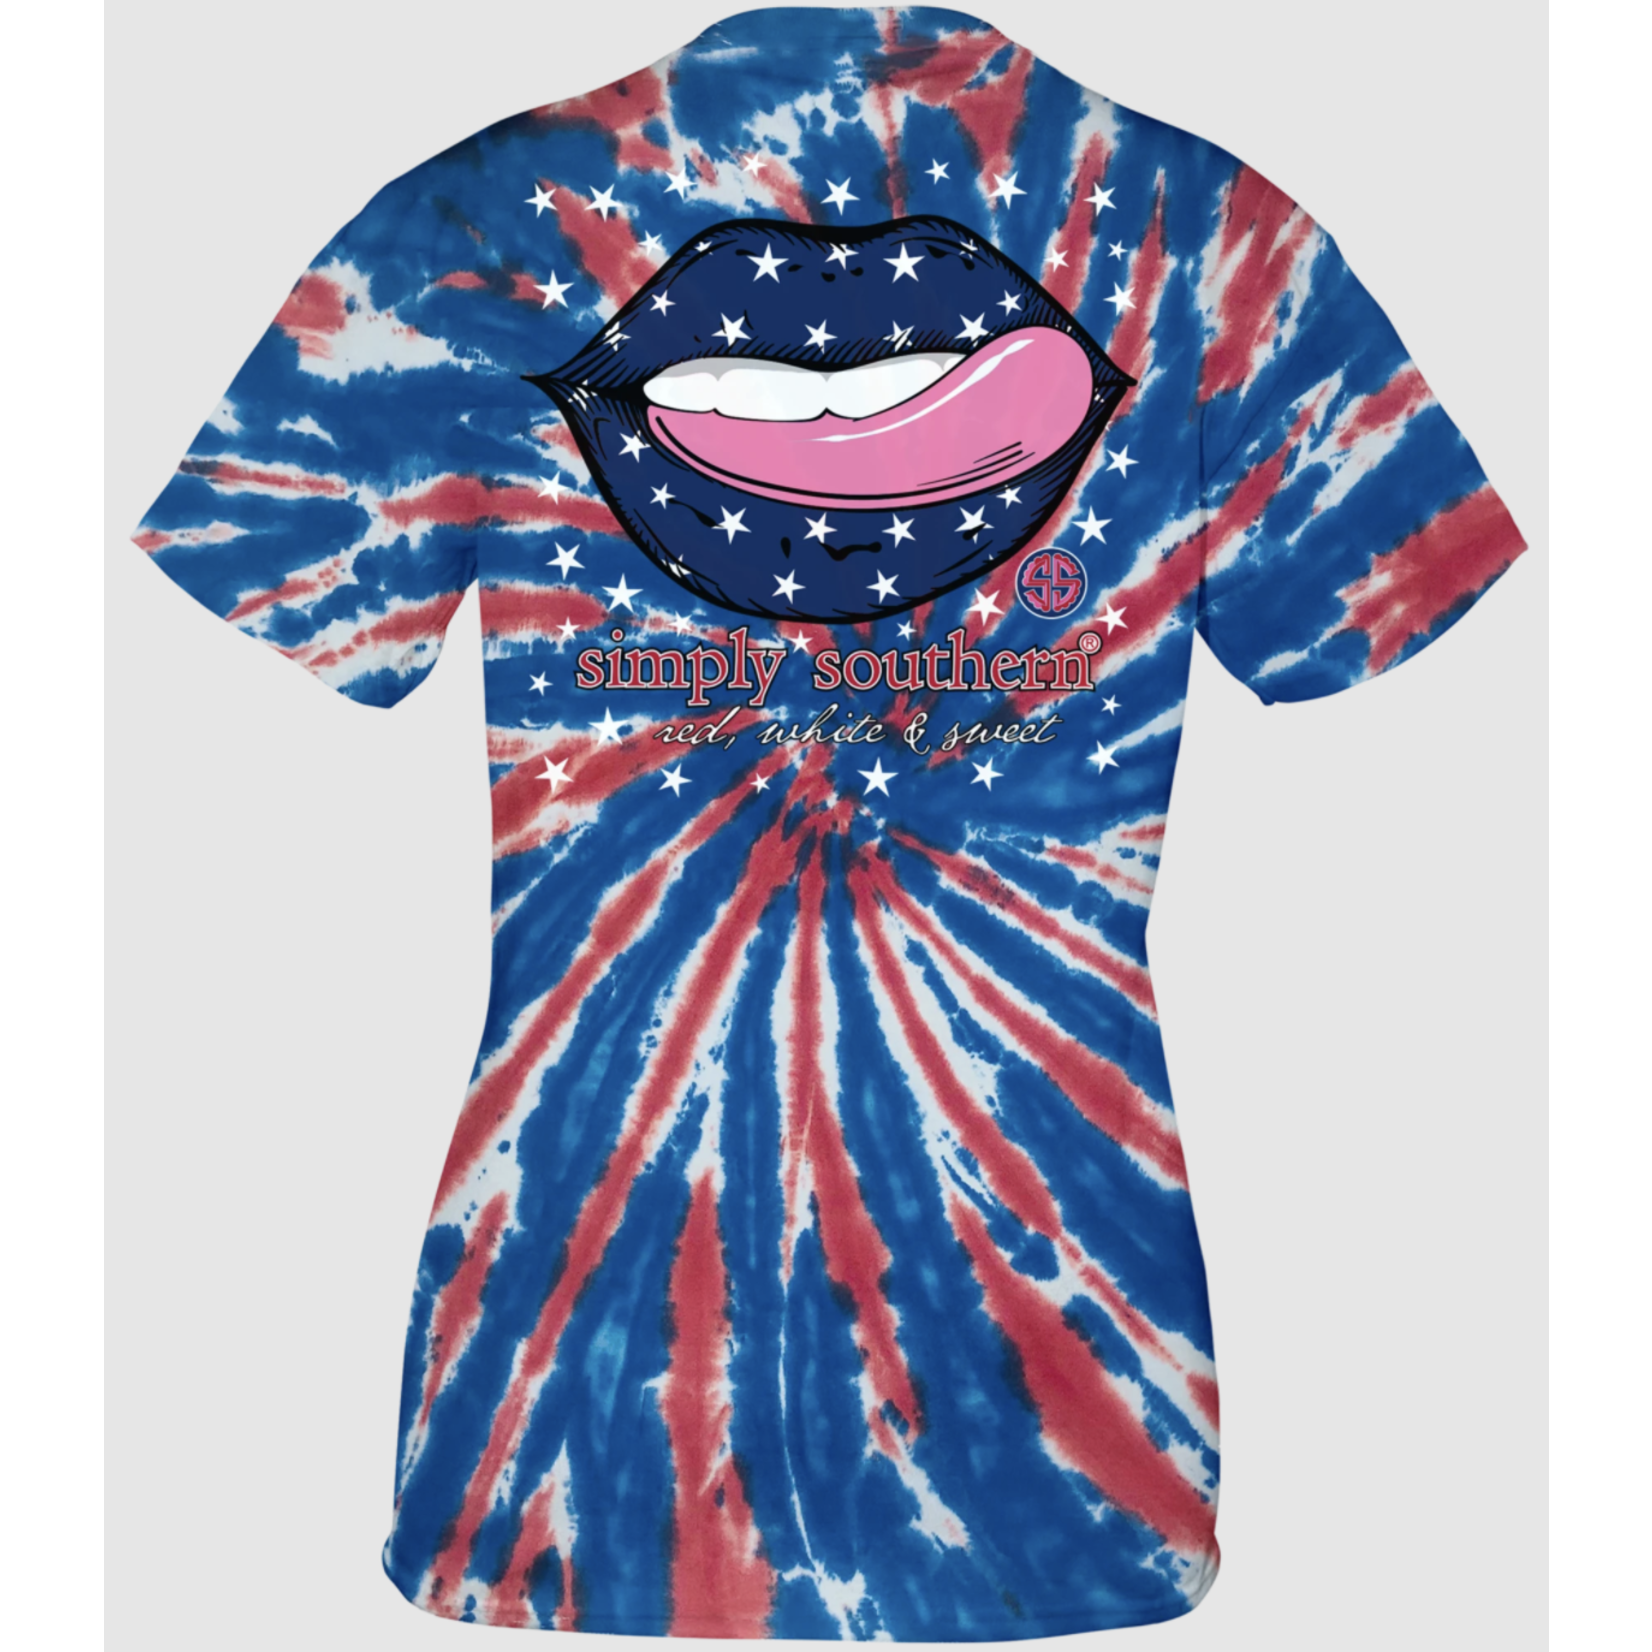 Simply Southern SS Red, White, And Sweet Tee Youth Small